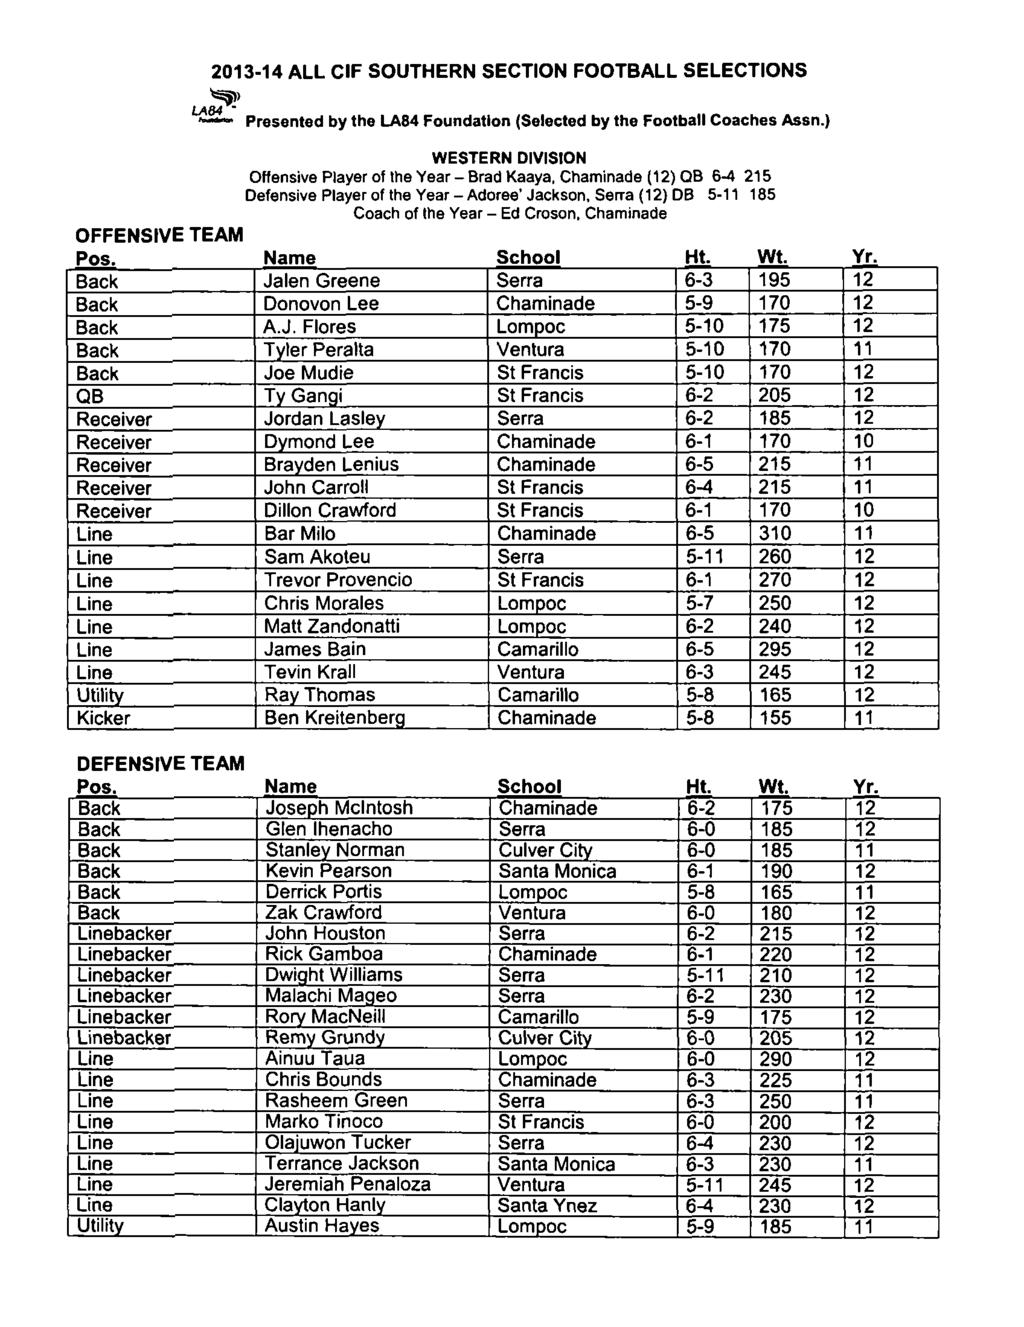 ALL CIF SOUTHERN SECTION FOOTBALL SELECTIONS - PDF ΔΩΡΕΑΝ Λήψη